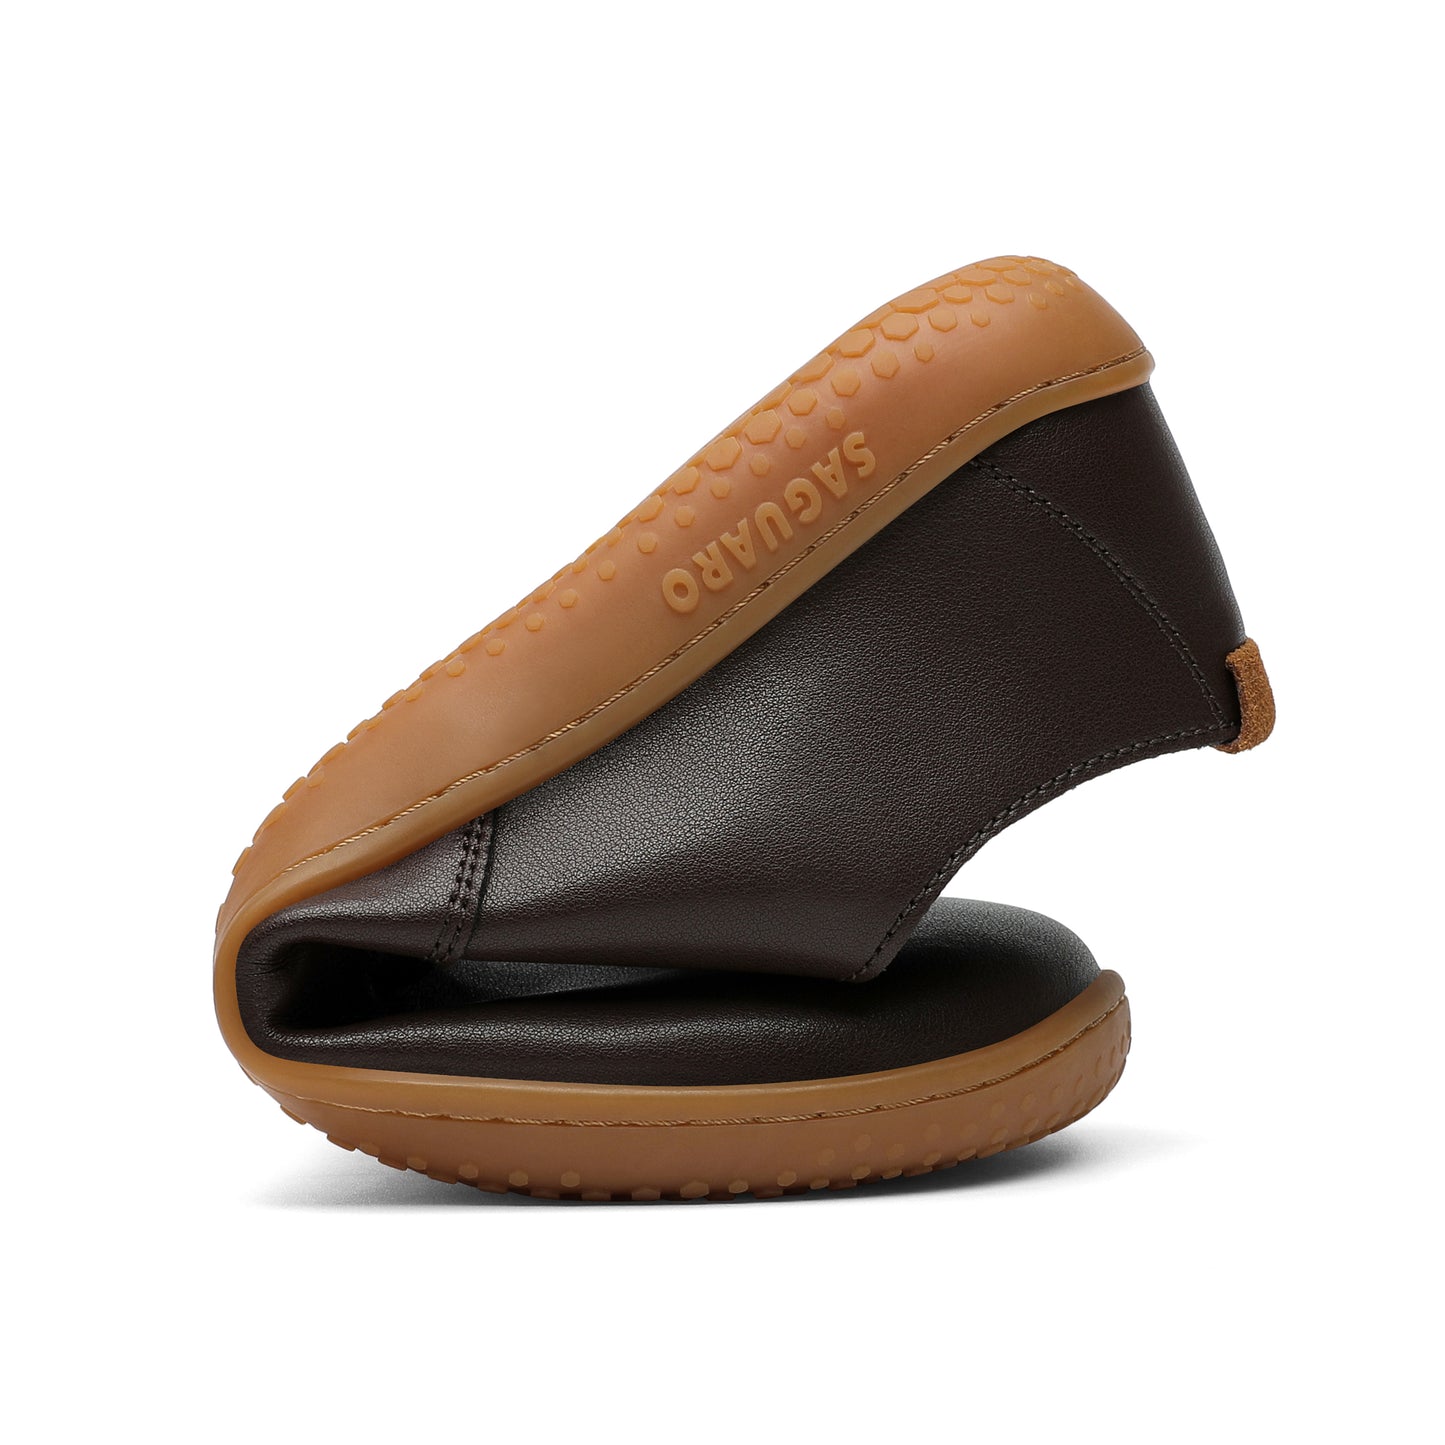 Dream III - Cafe - Business Casual Barefootshoes